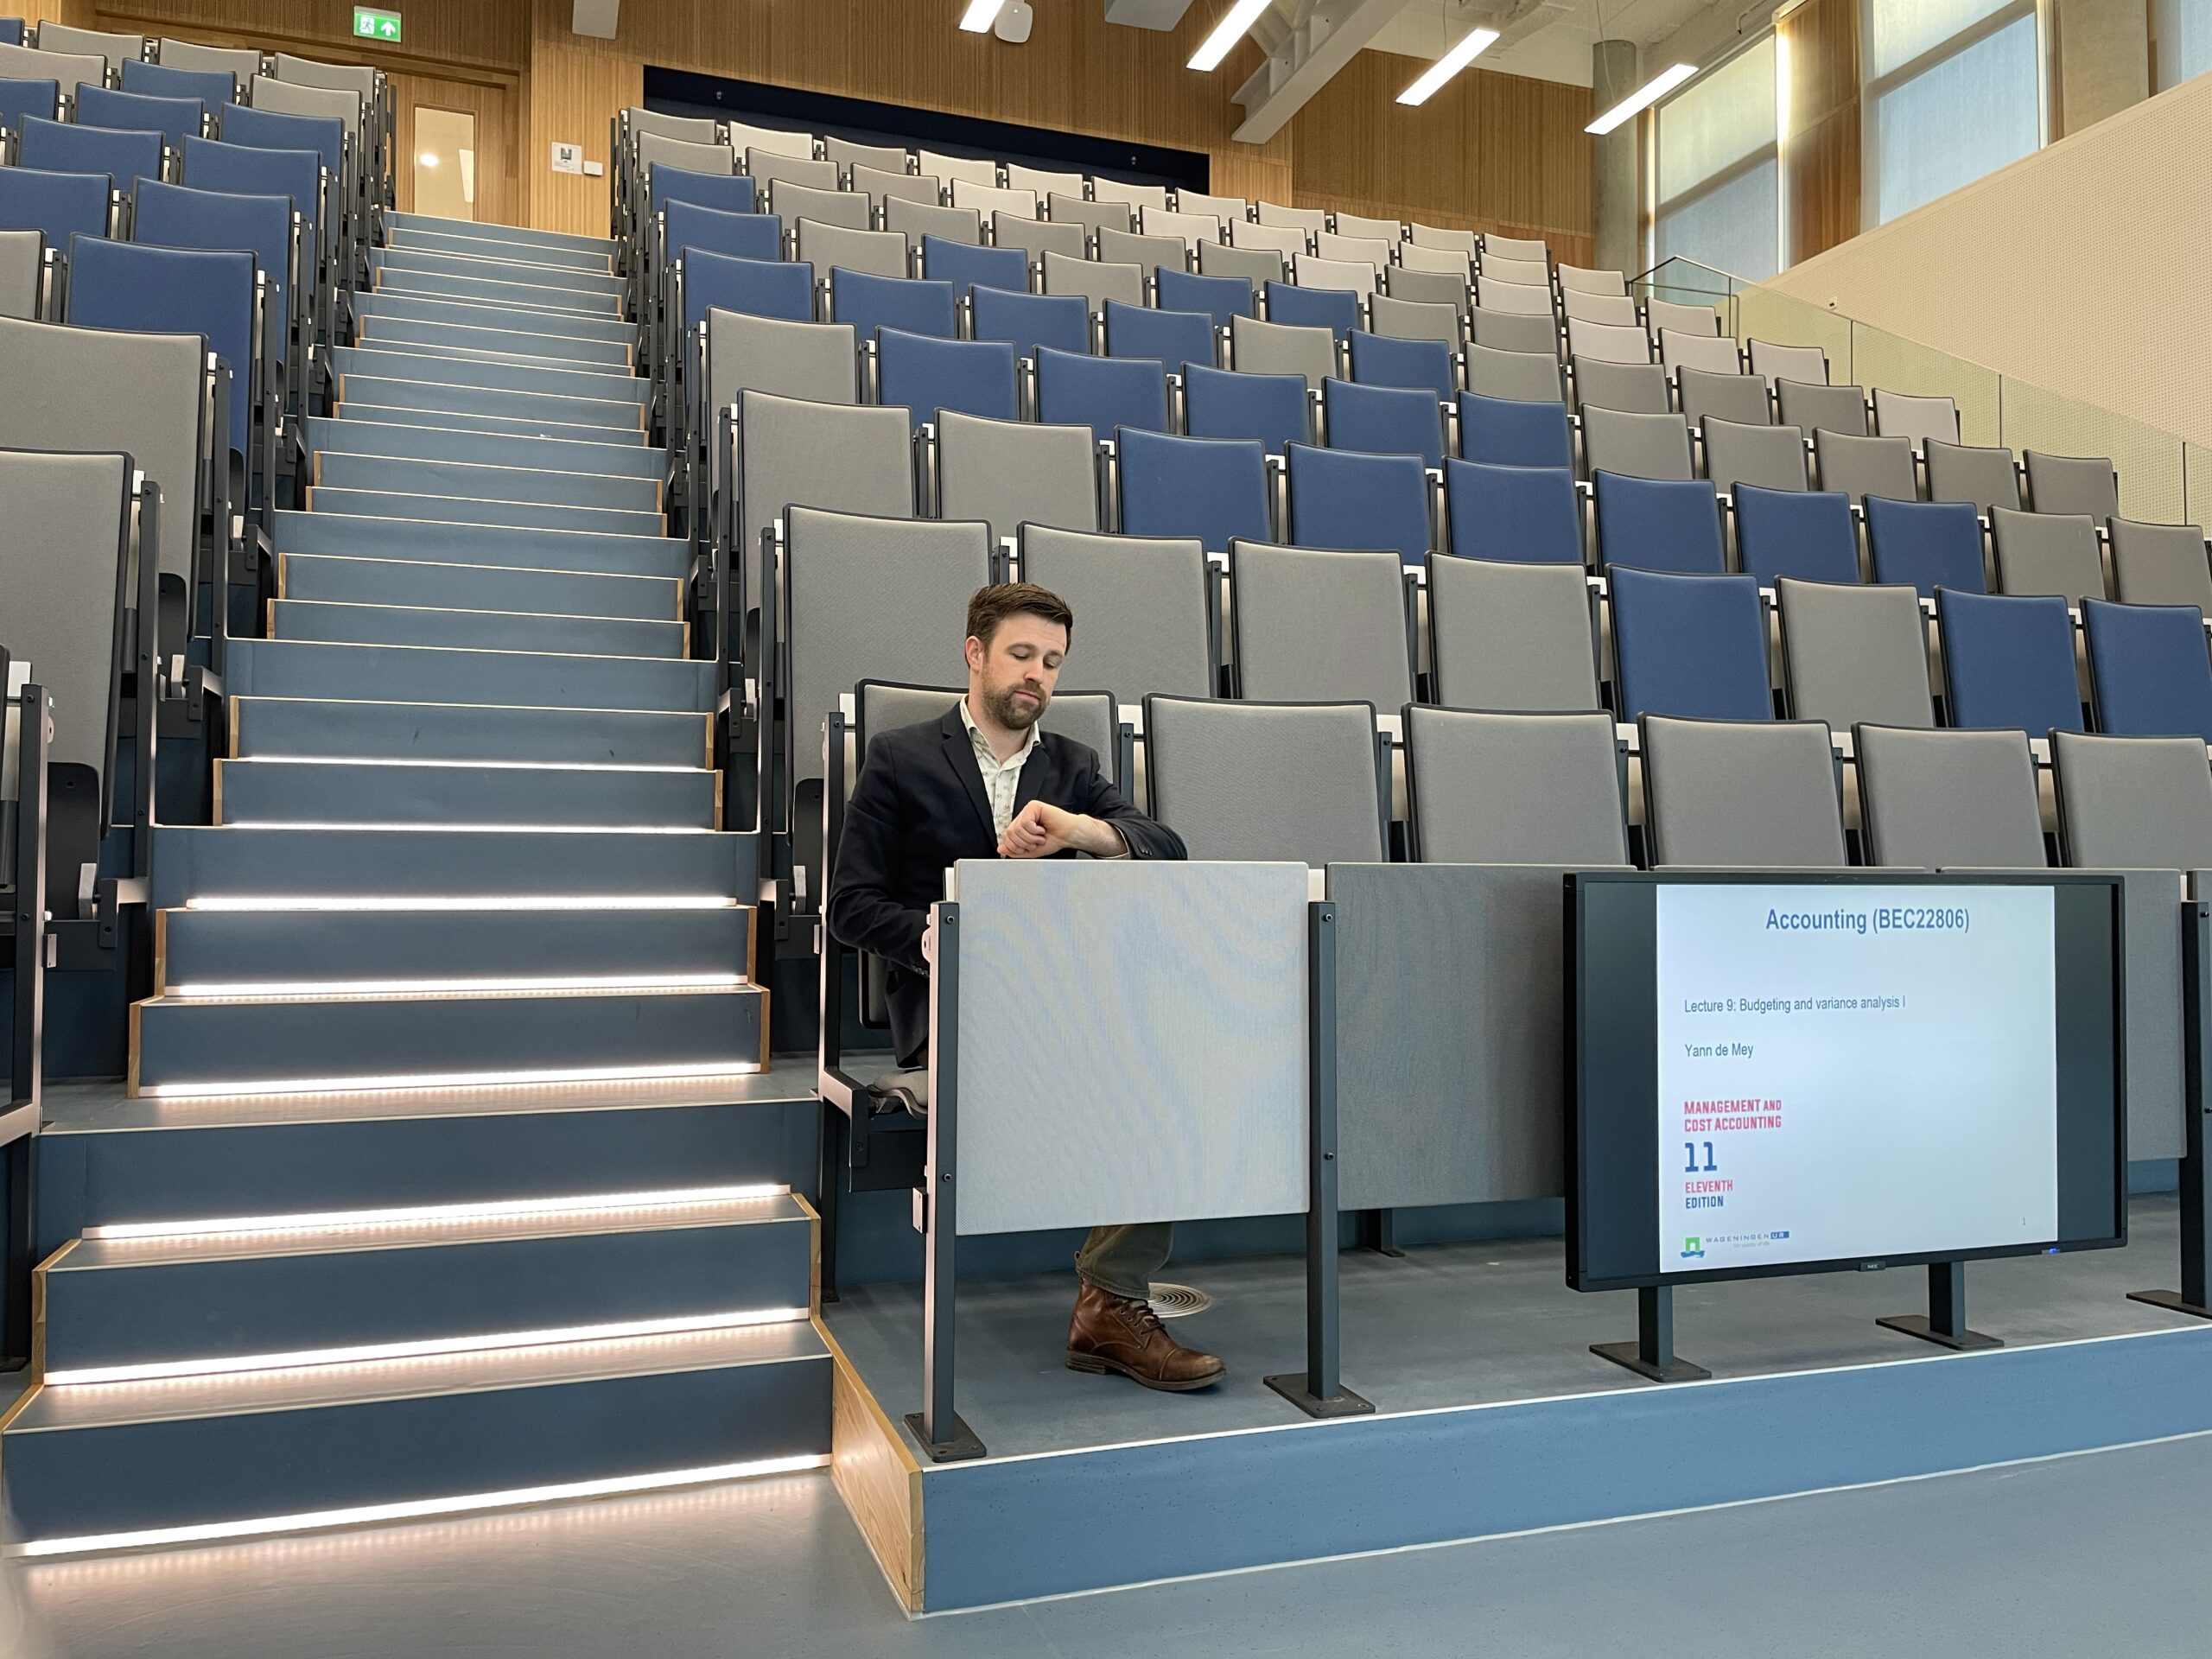 Cold feet? Lecture halls still emptier than expected